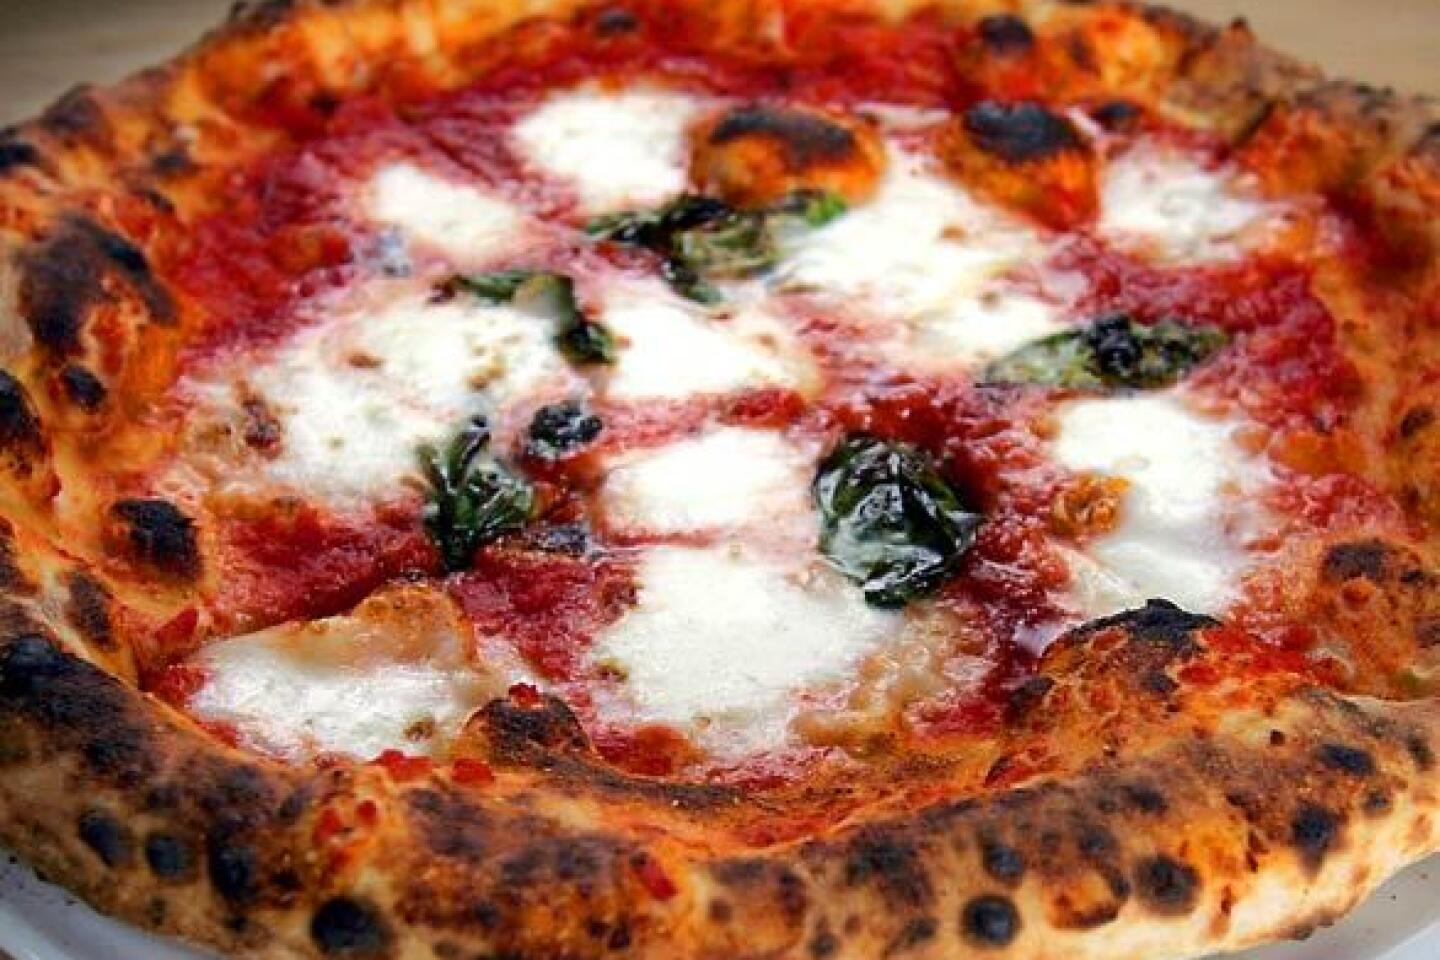 Restaurant review on Pizzeria Ortica in Costa Mesa